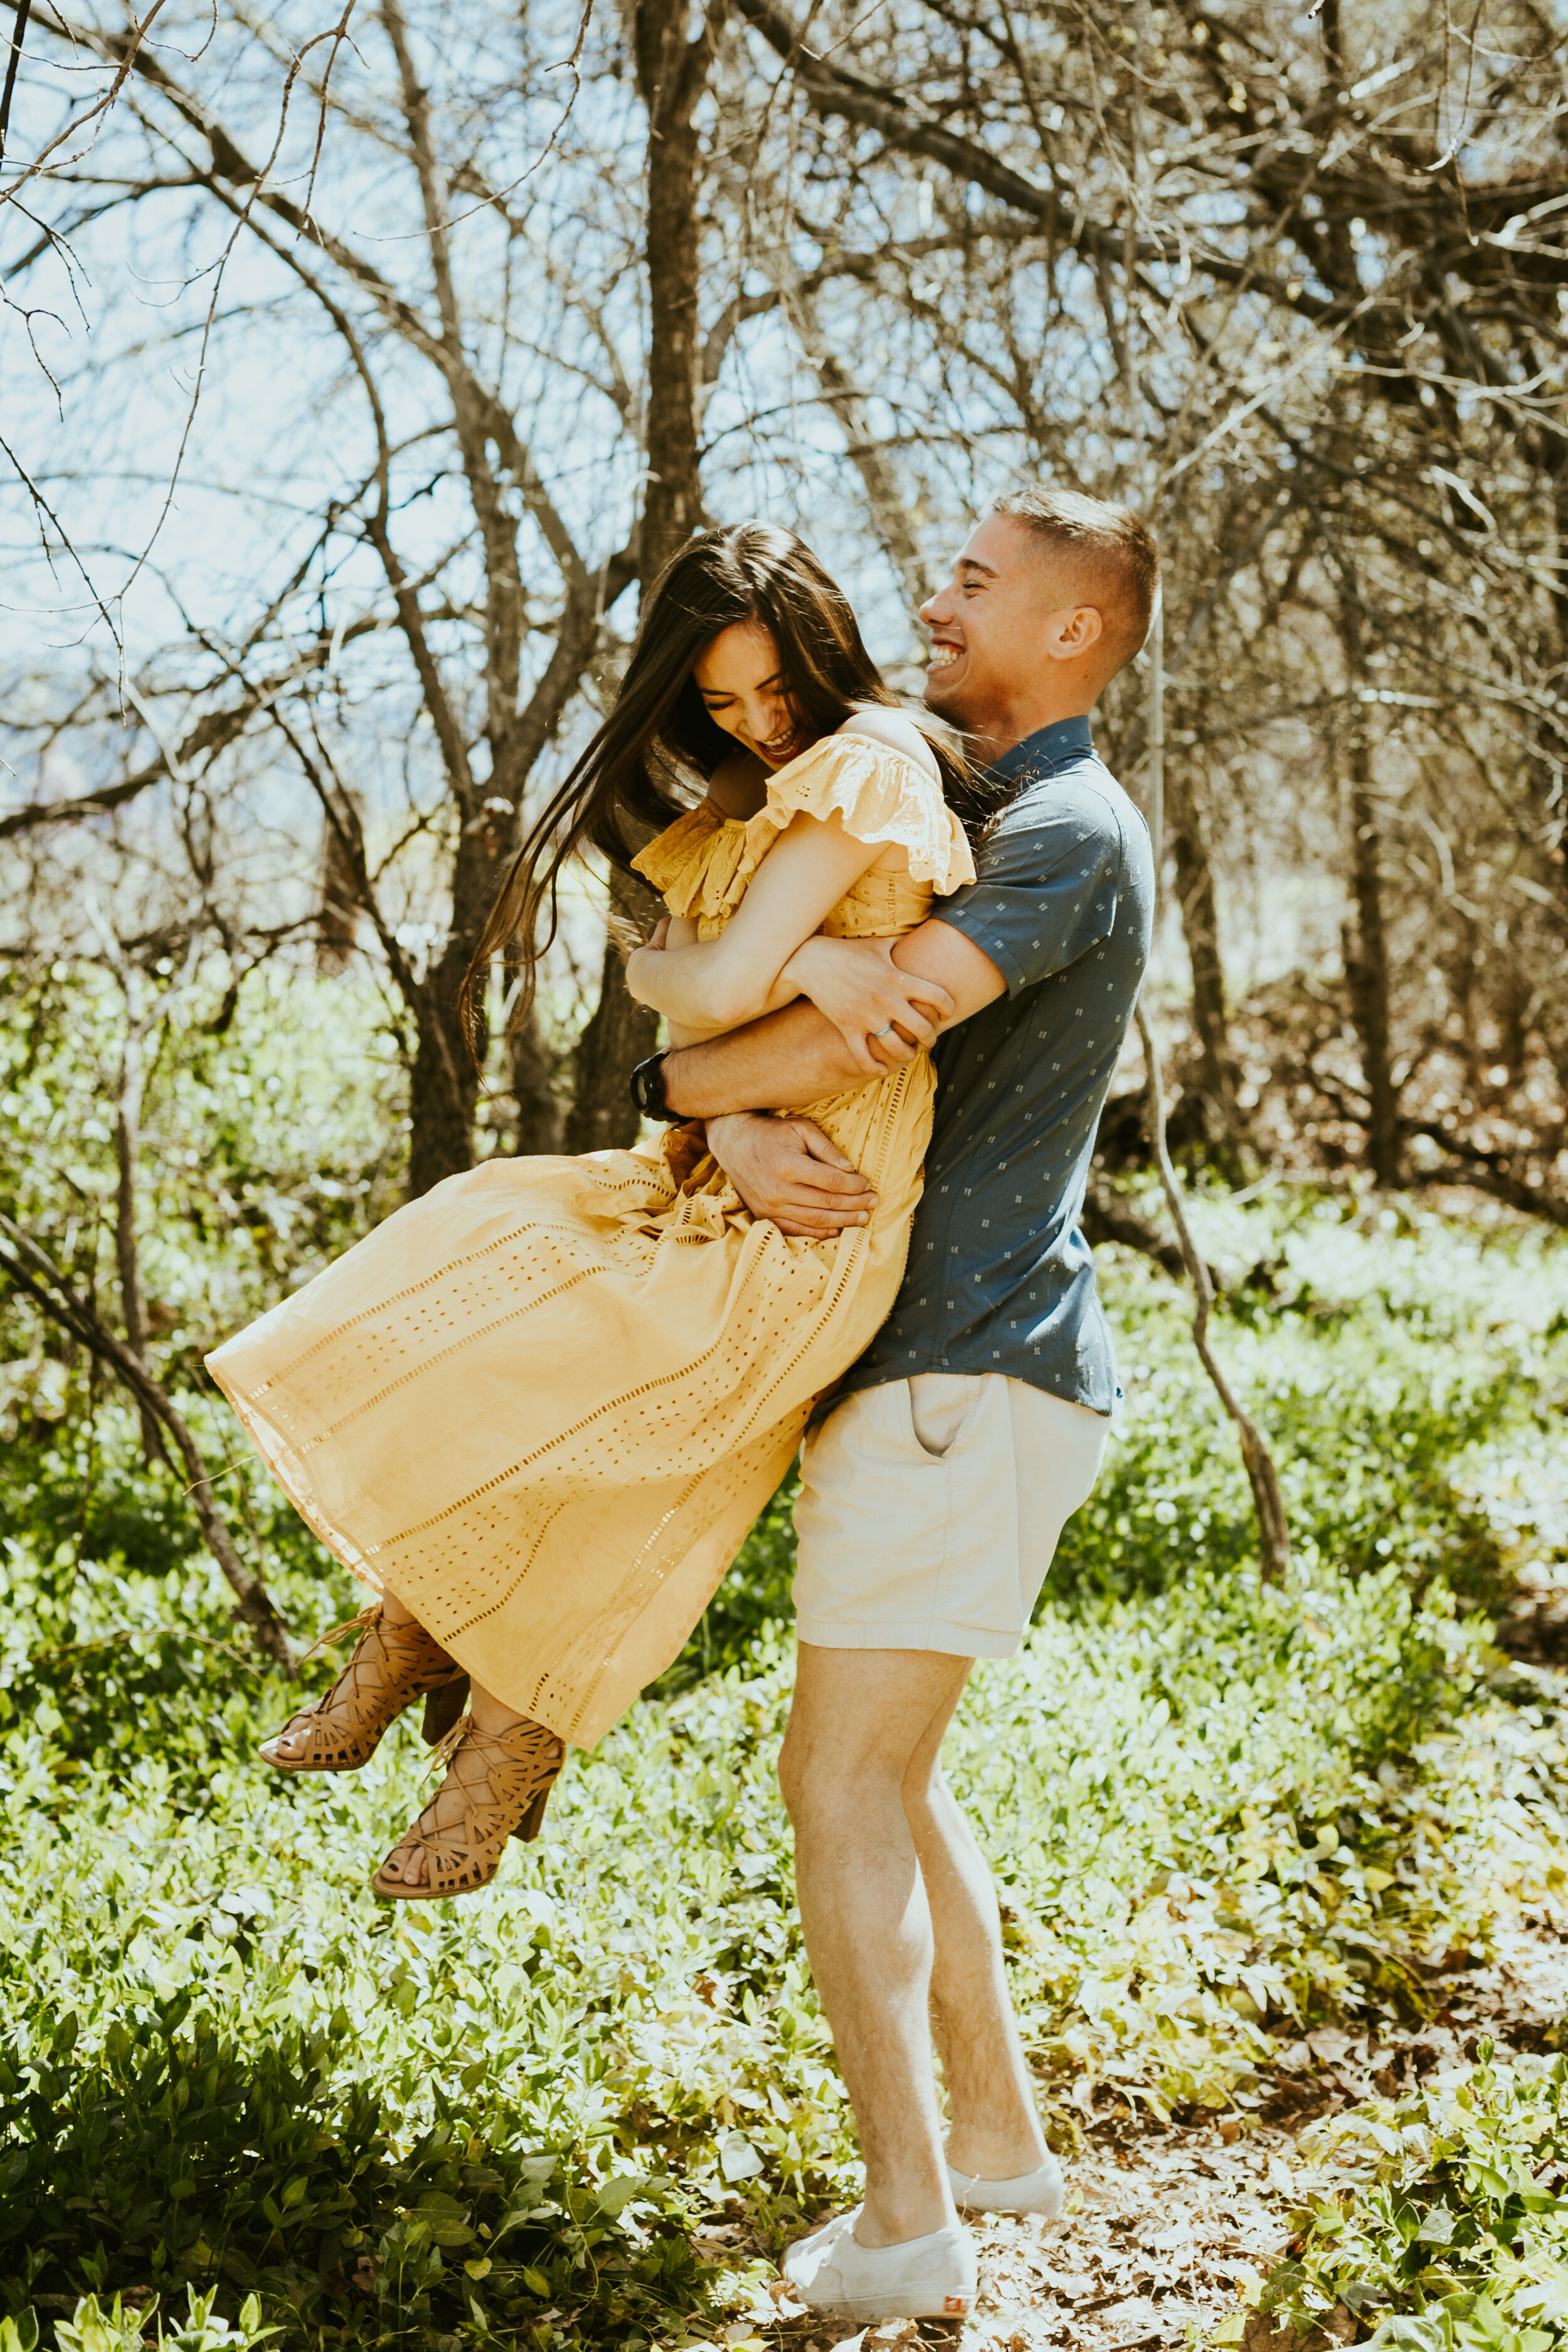 red rock crossing sedona arizona cathedral rock crescent moon ranch couple photos engagement photo outfit inspiration couple posing ideas midday photos anniversary photos-9.jpg